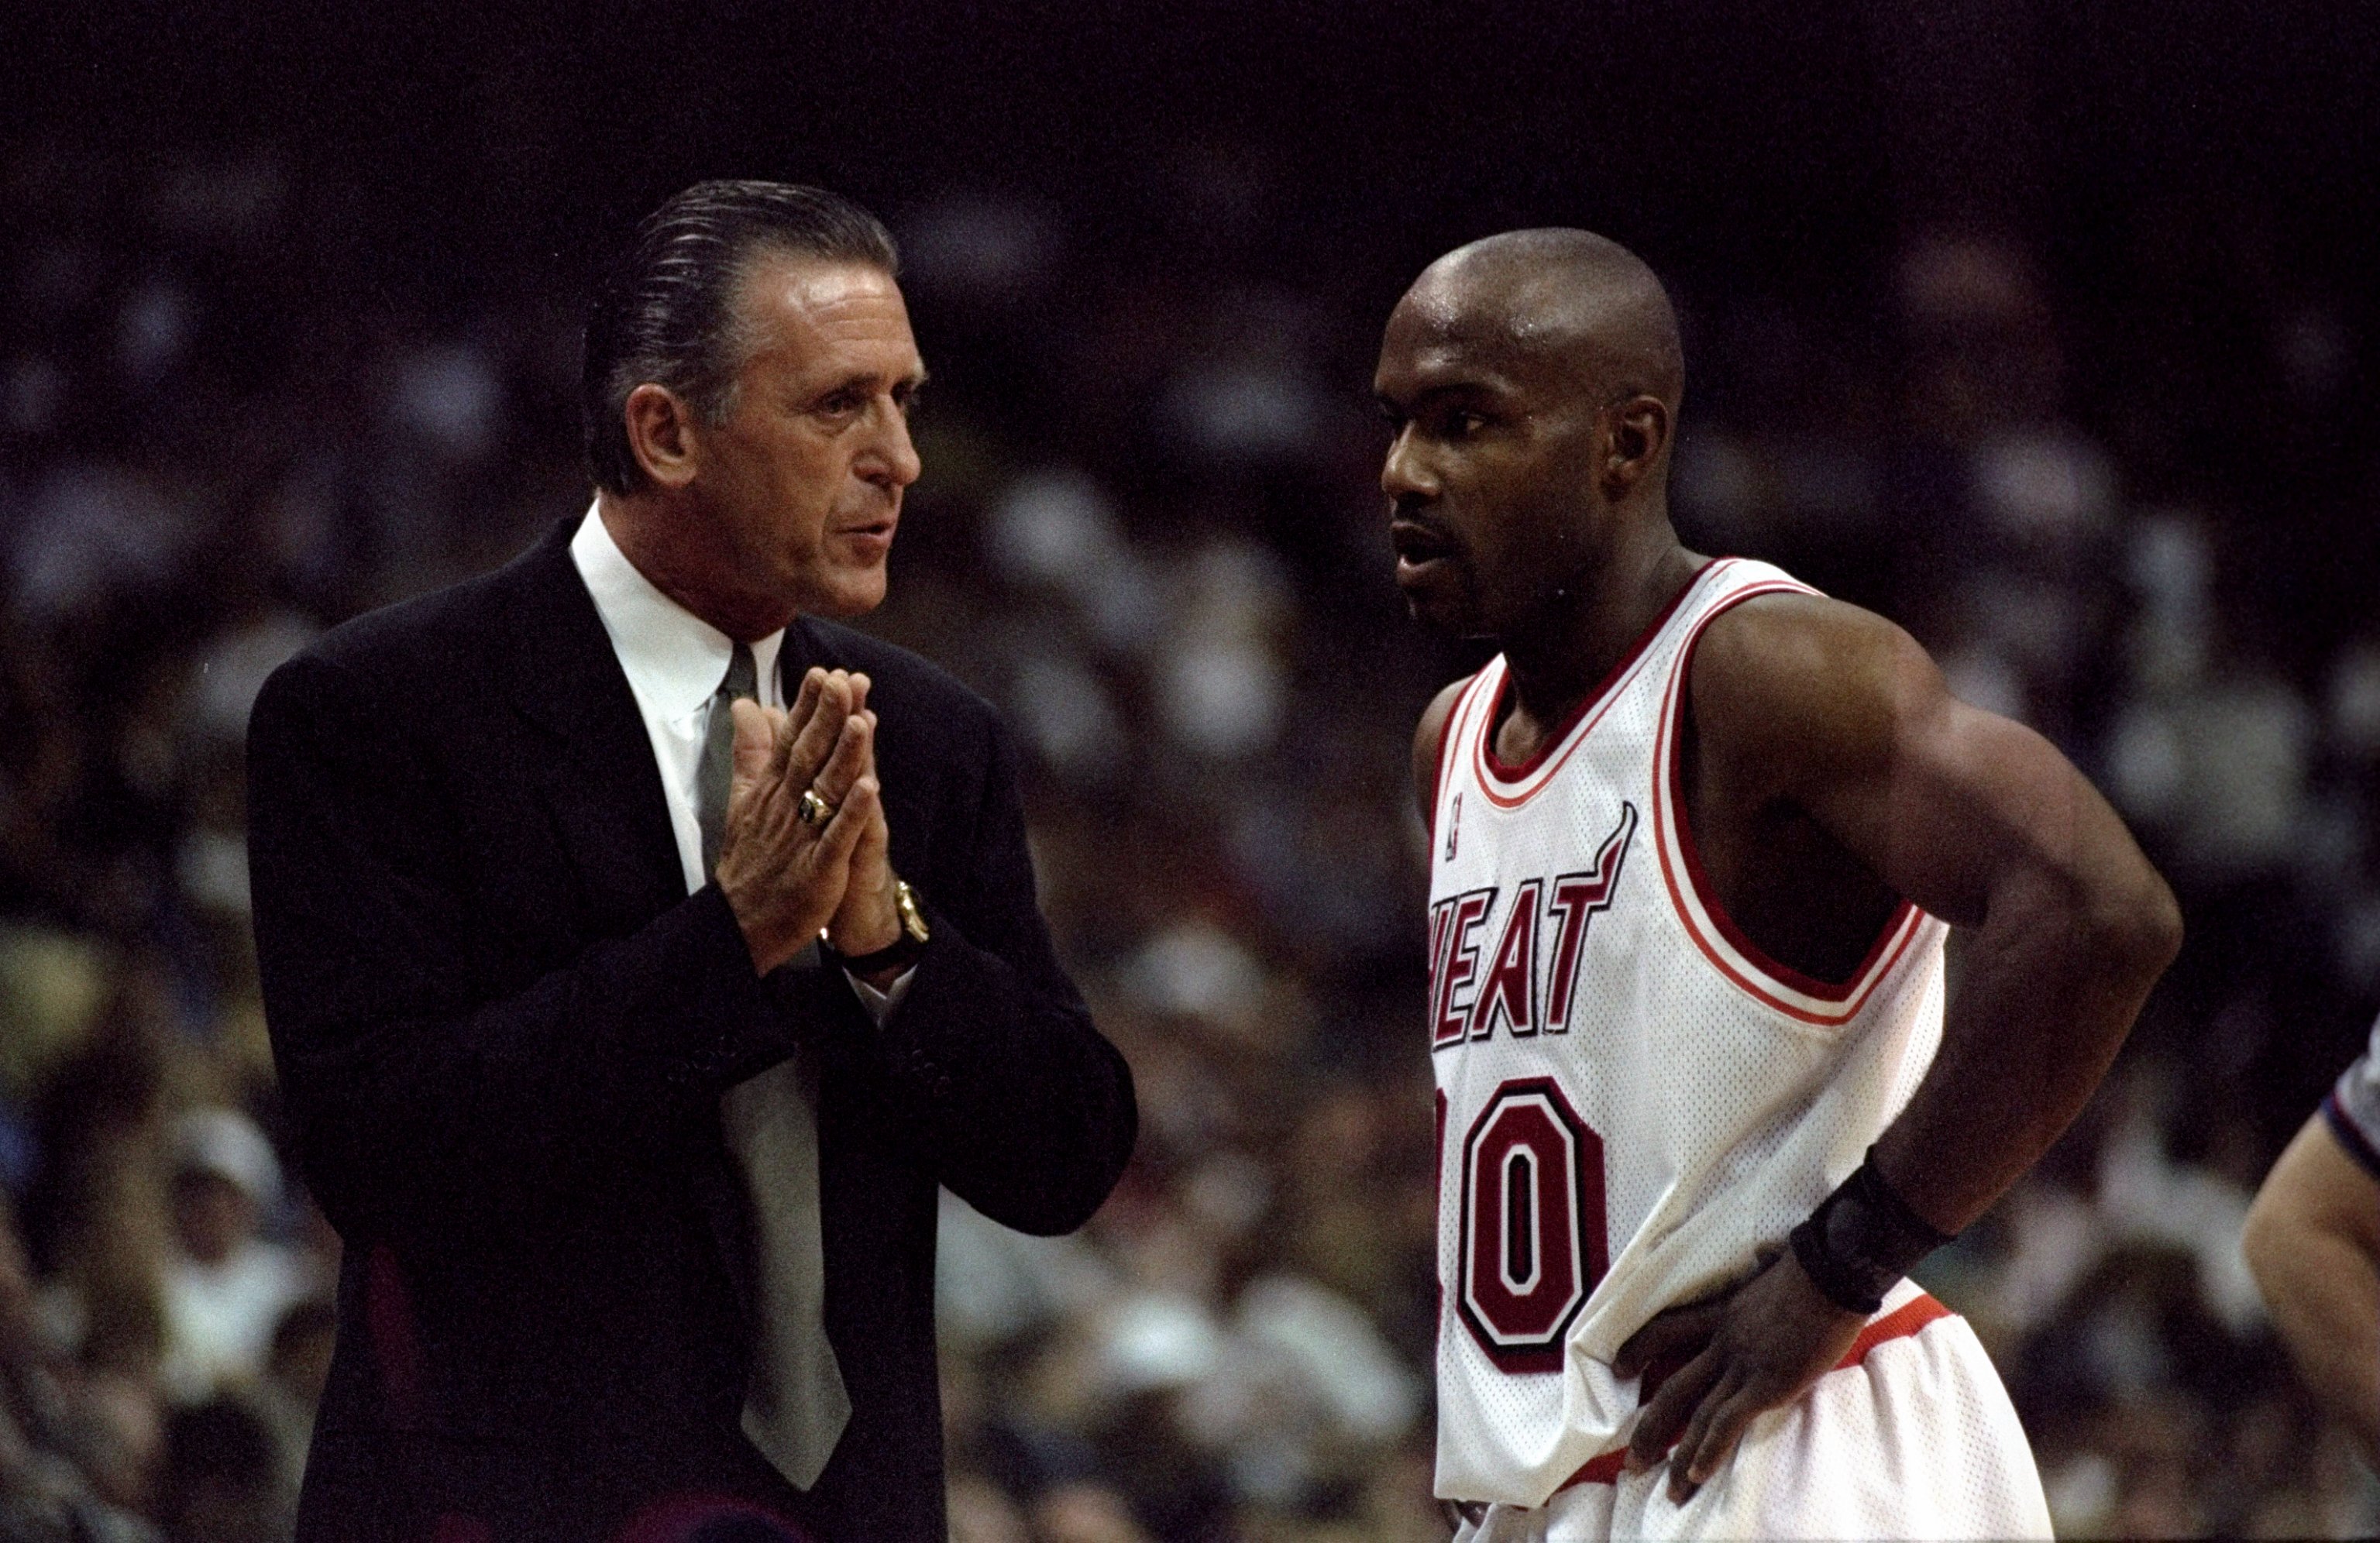 Head coach Jerry West and assistant coach Pat Riley of the Los